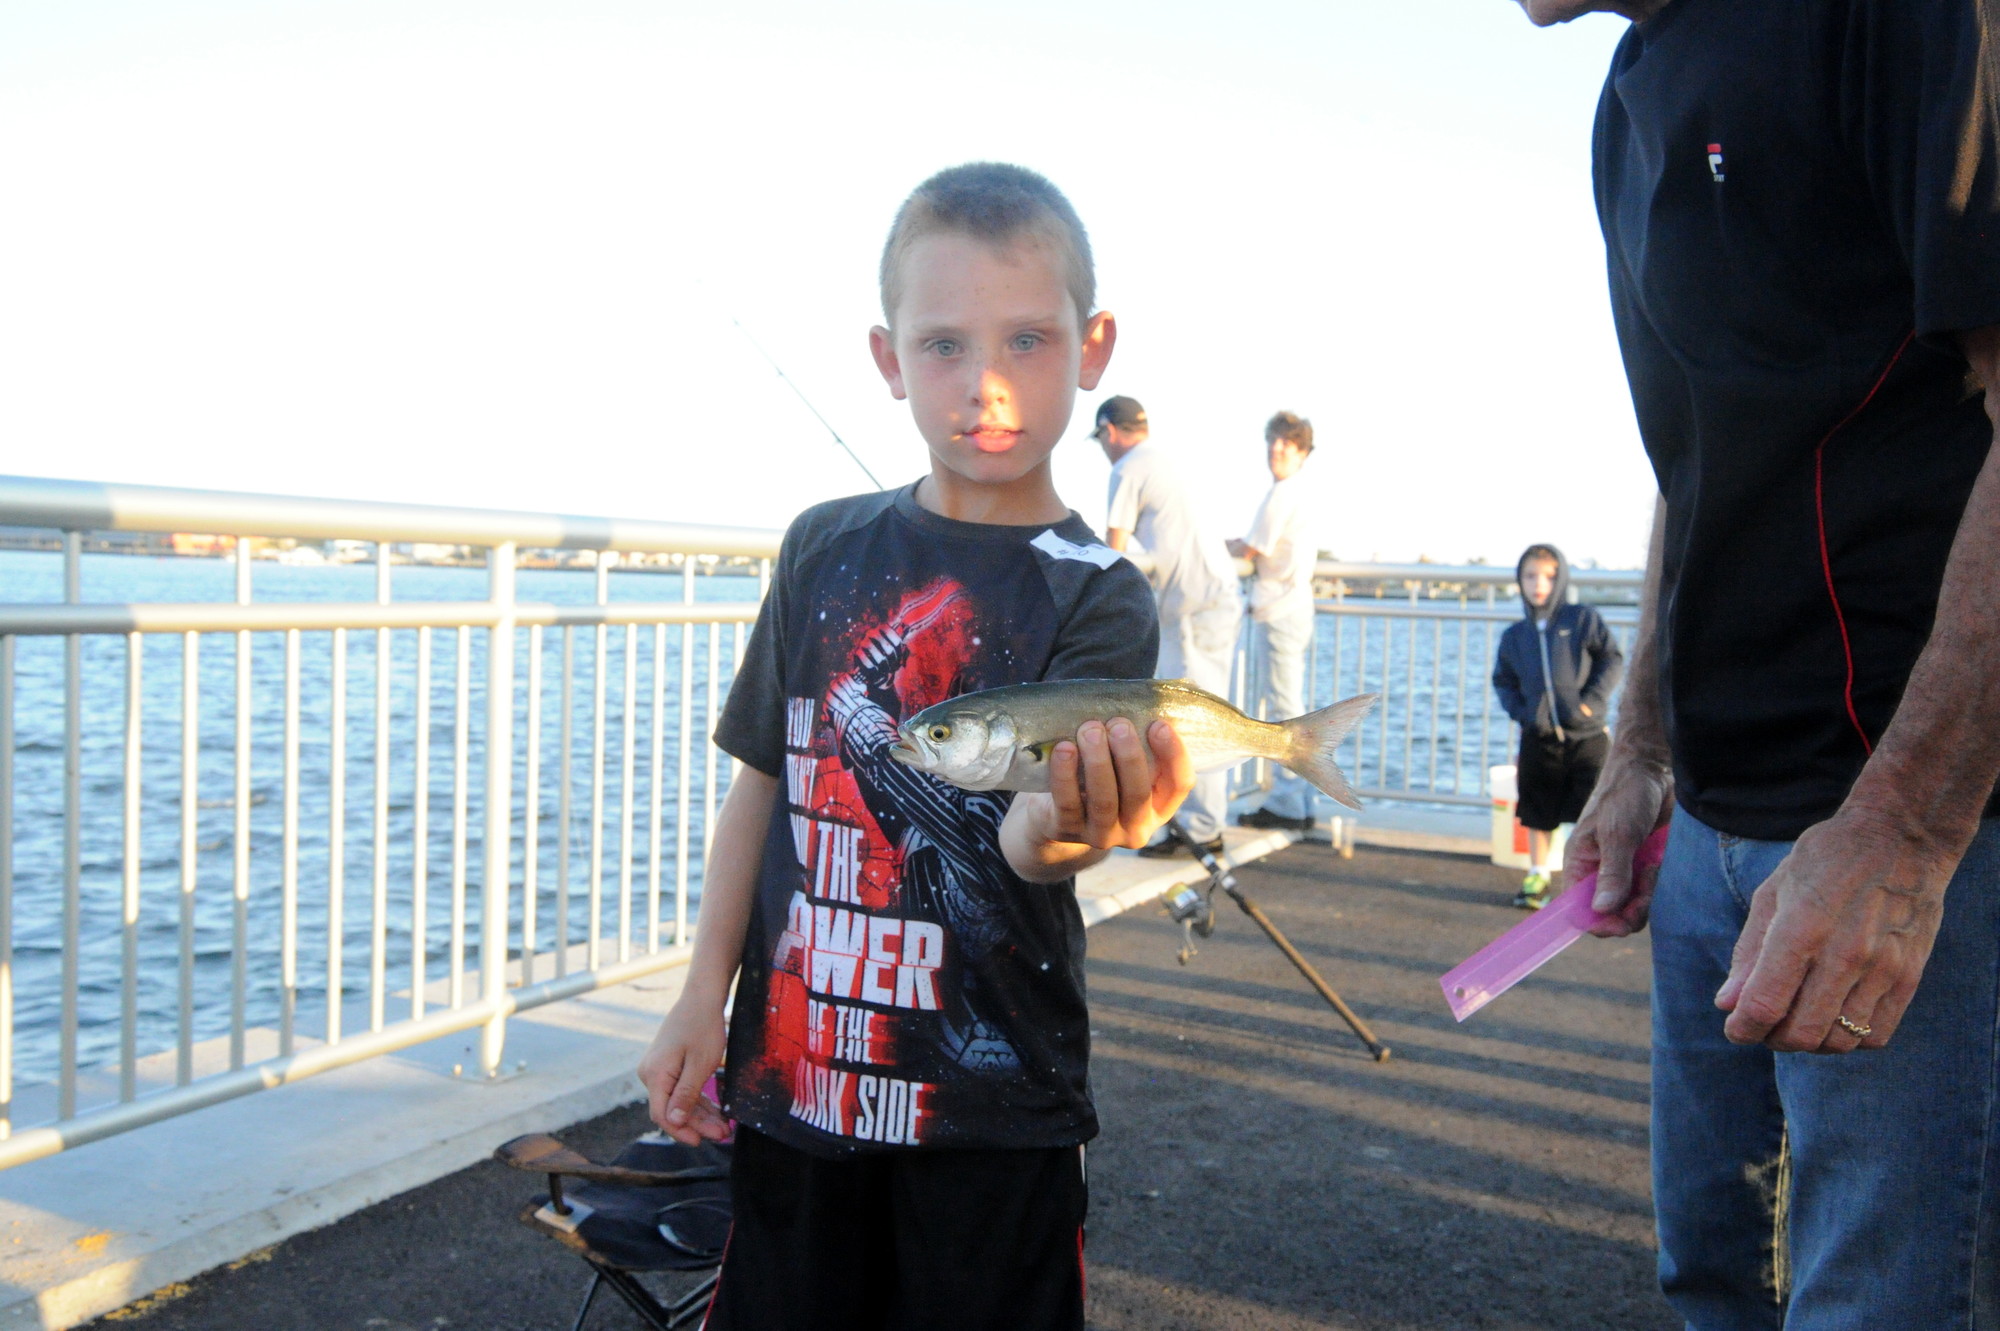 Andrew Livingston (age 8) shows his catch before he tossed it back in.